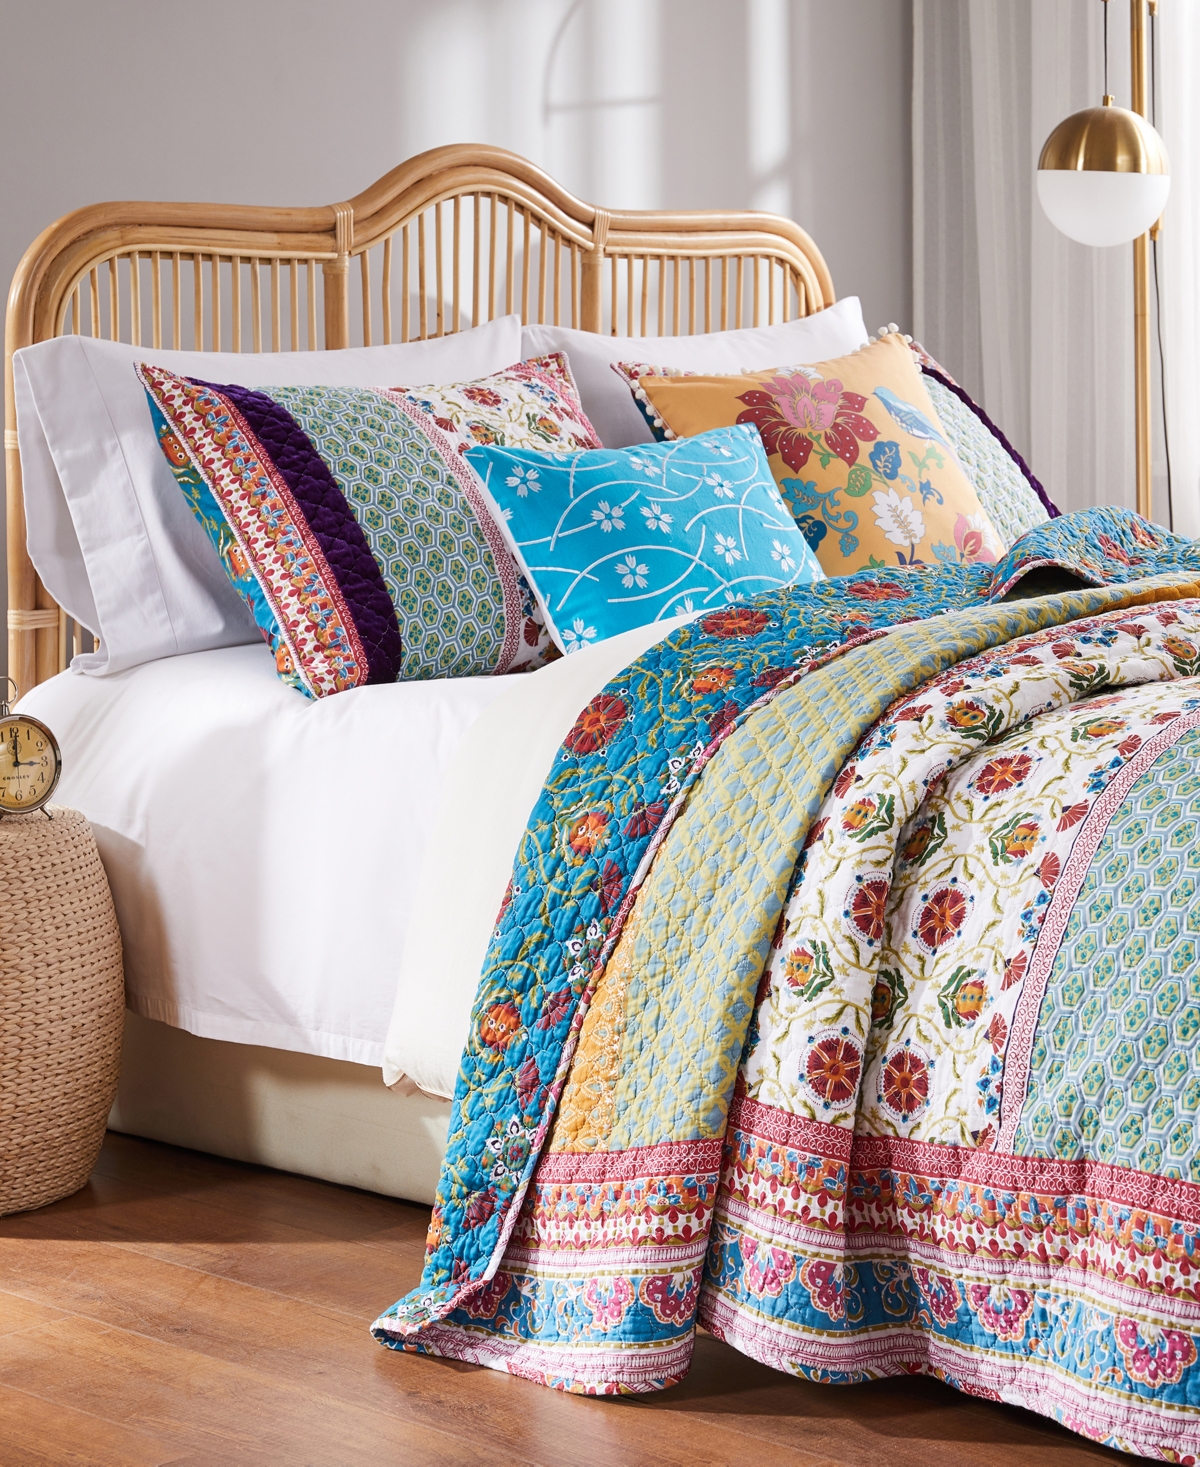 Greenland Home Fashions Thalia Cotton Reversible 4 Piece Quilt Set, Twin/twin Xl In Multi